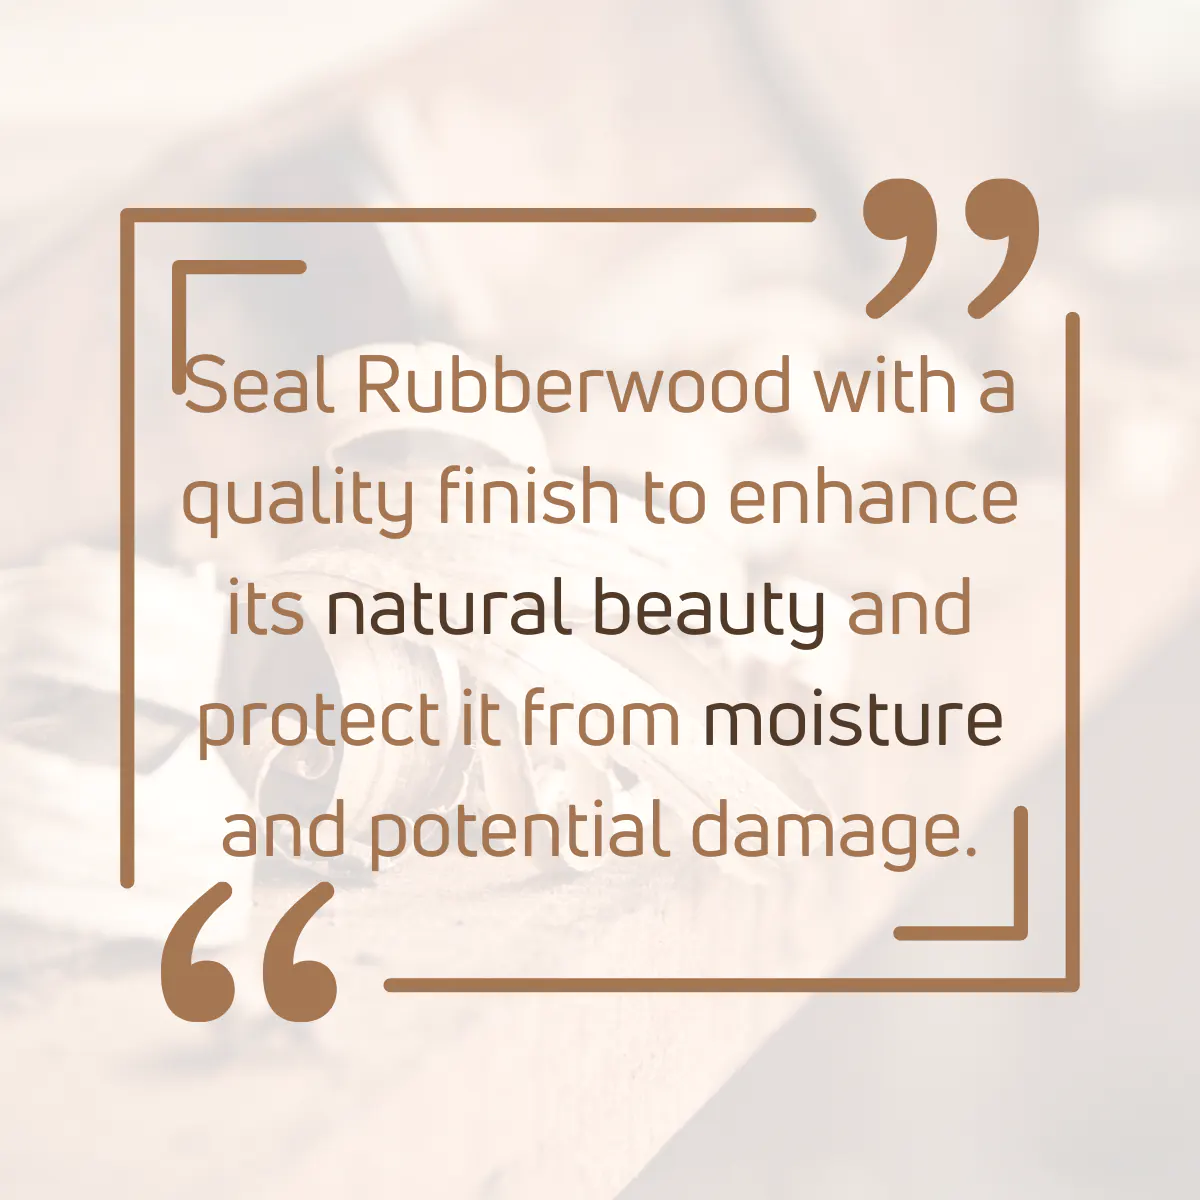 Tip for working with Rubber wood